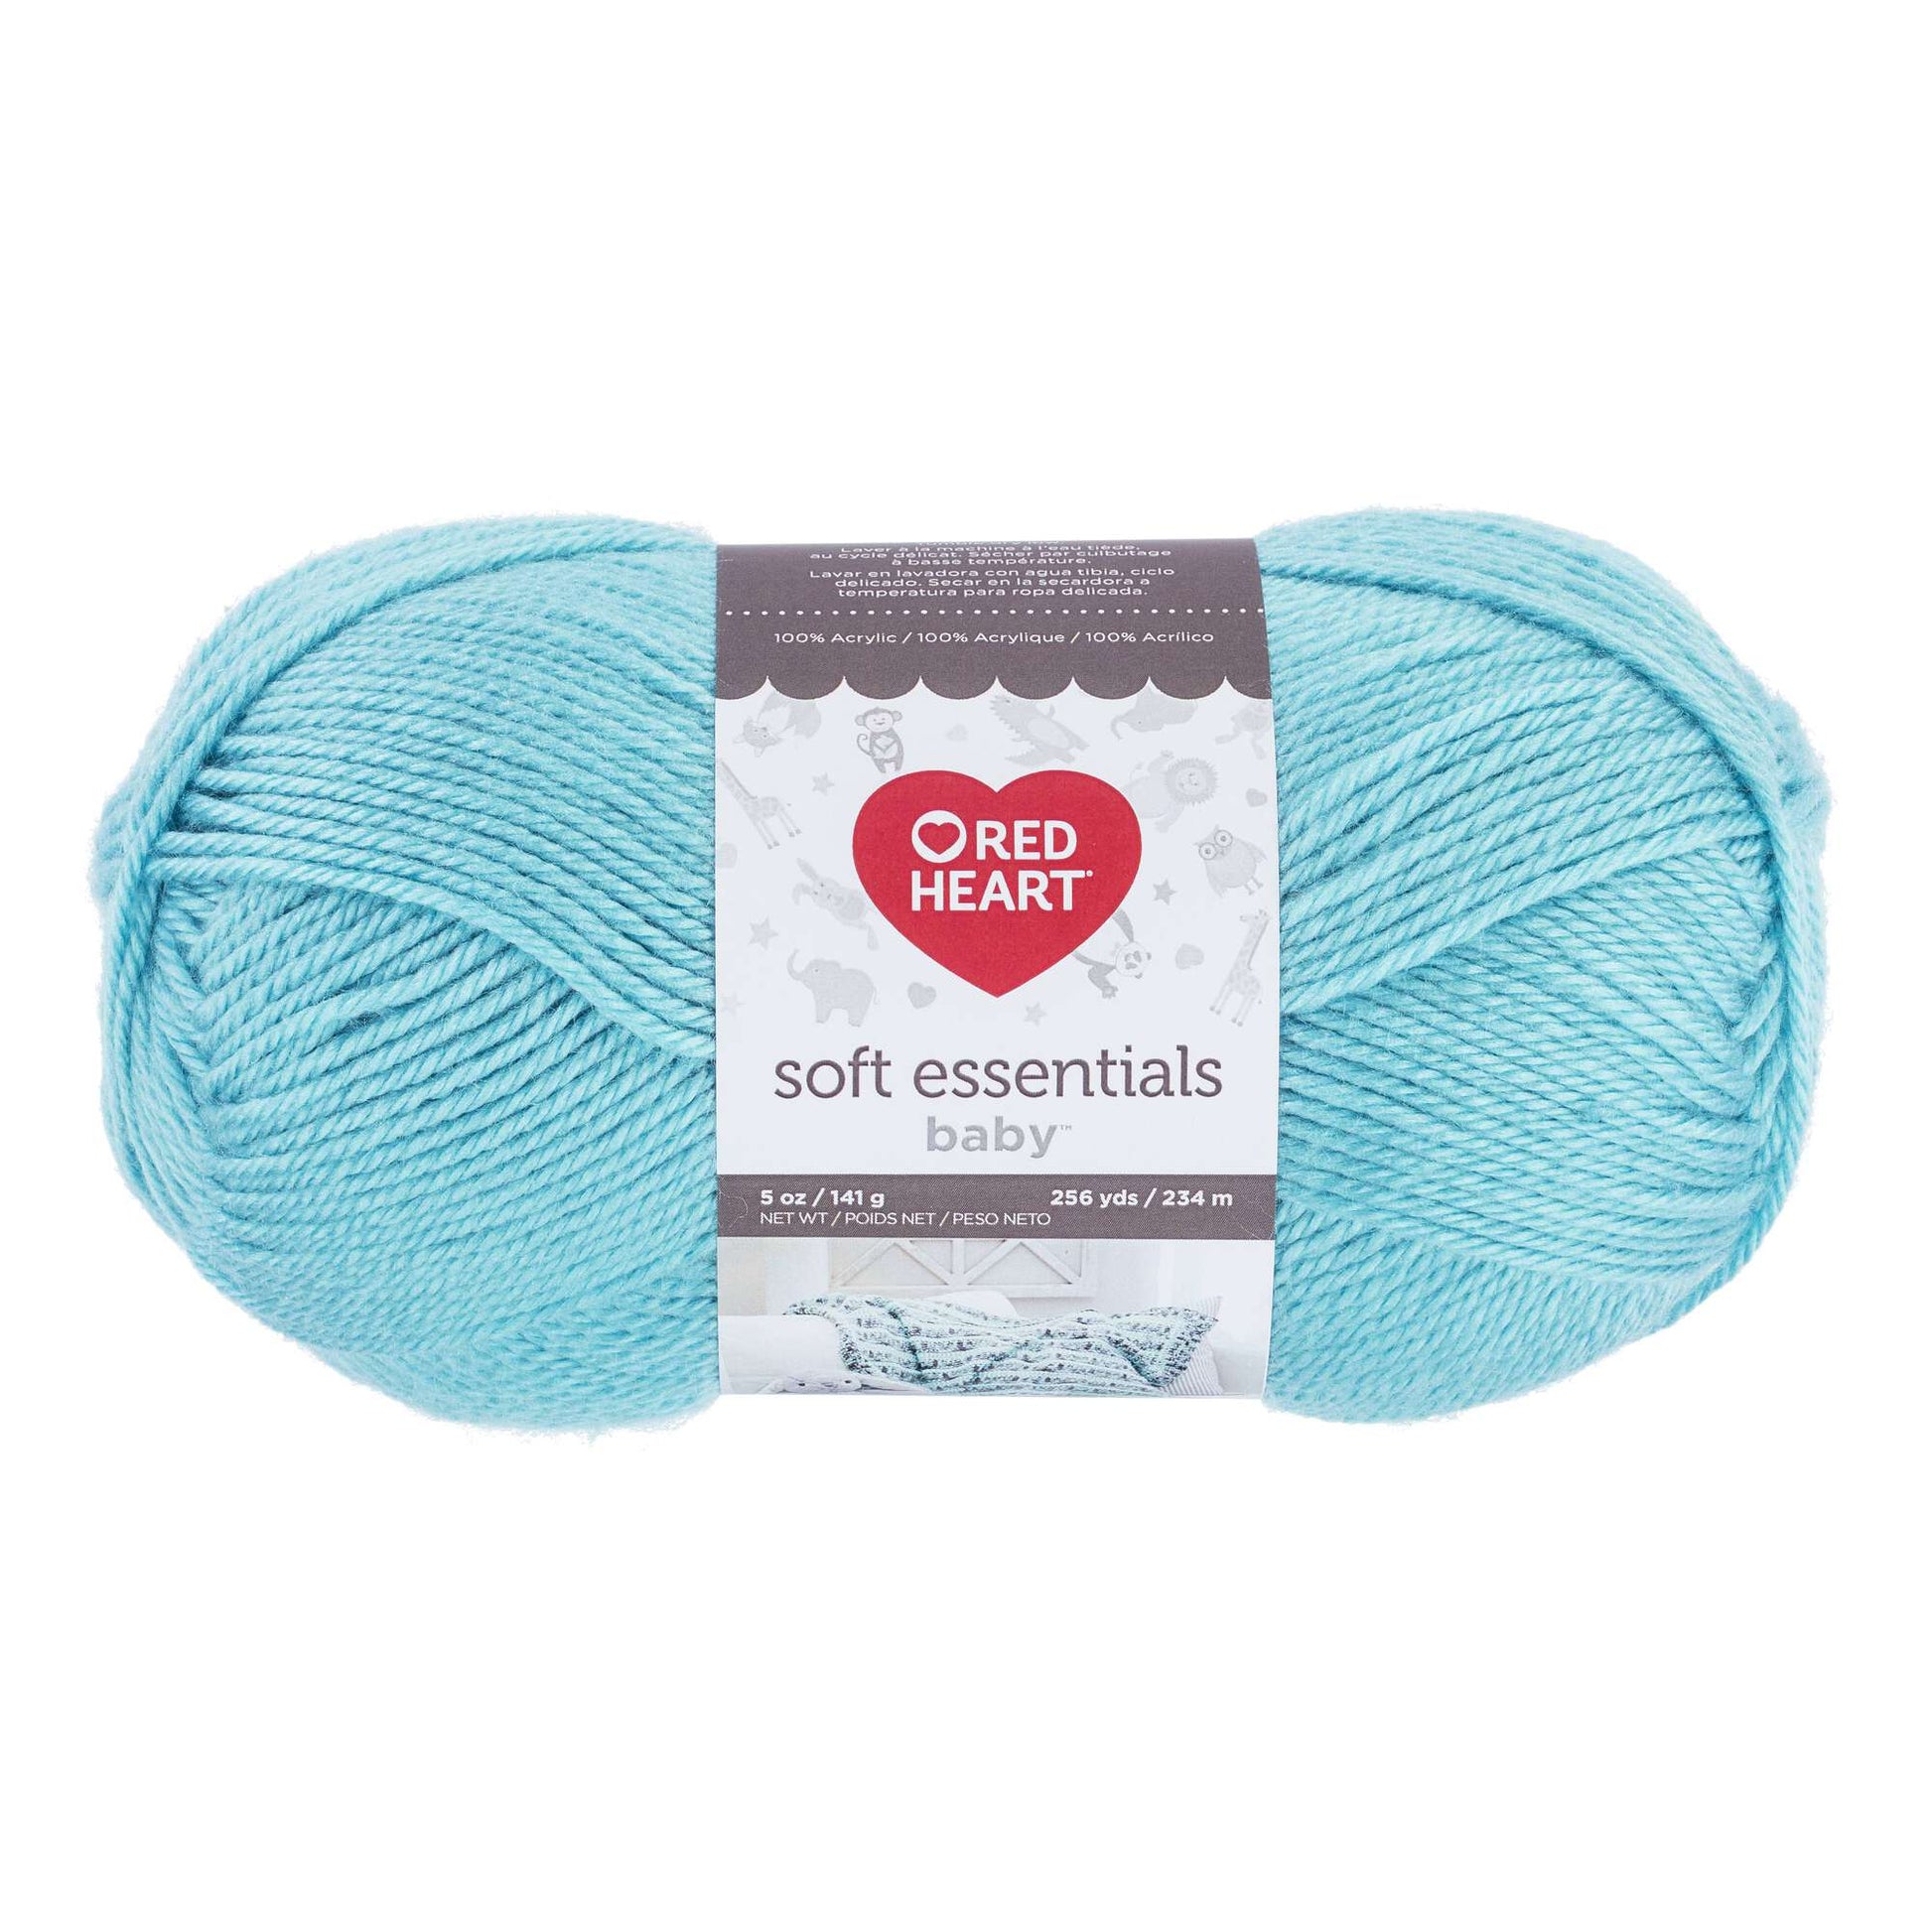 Red Heart Soft Essentials Baby Yarn - Discontinued shades